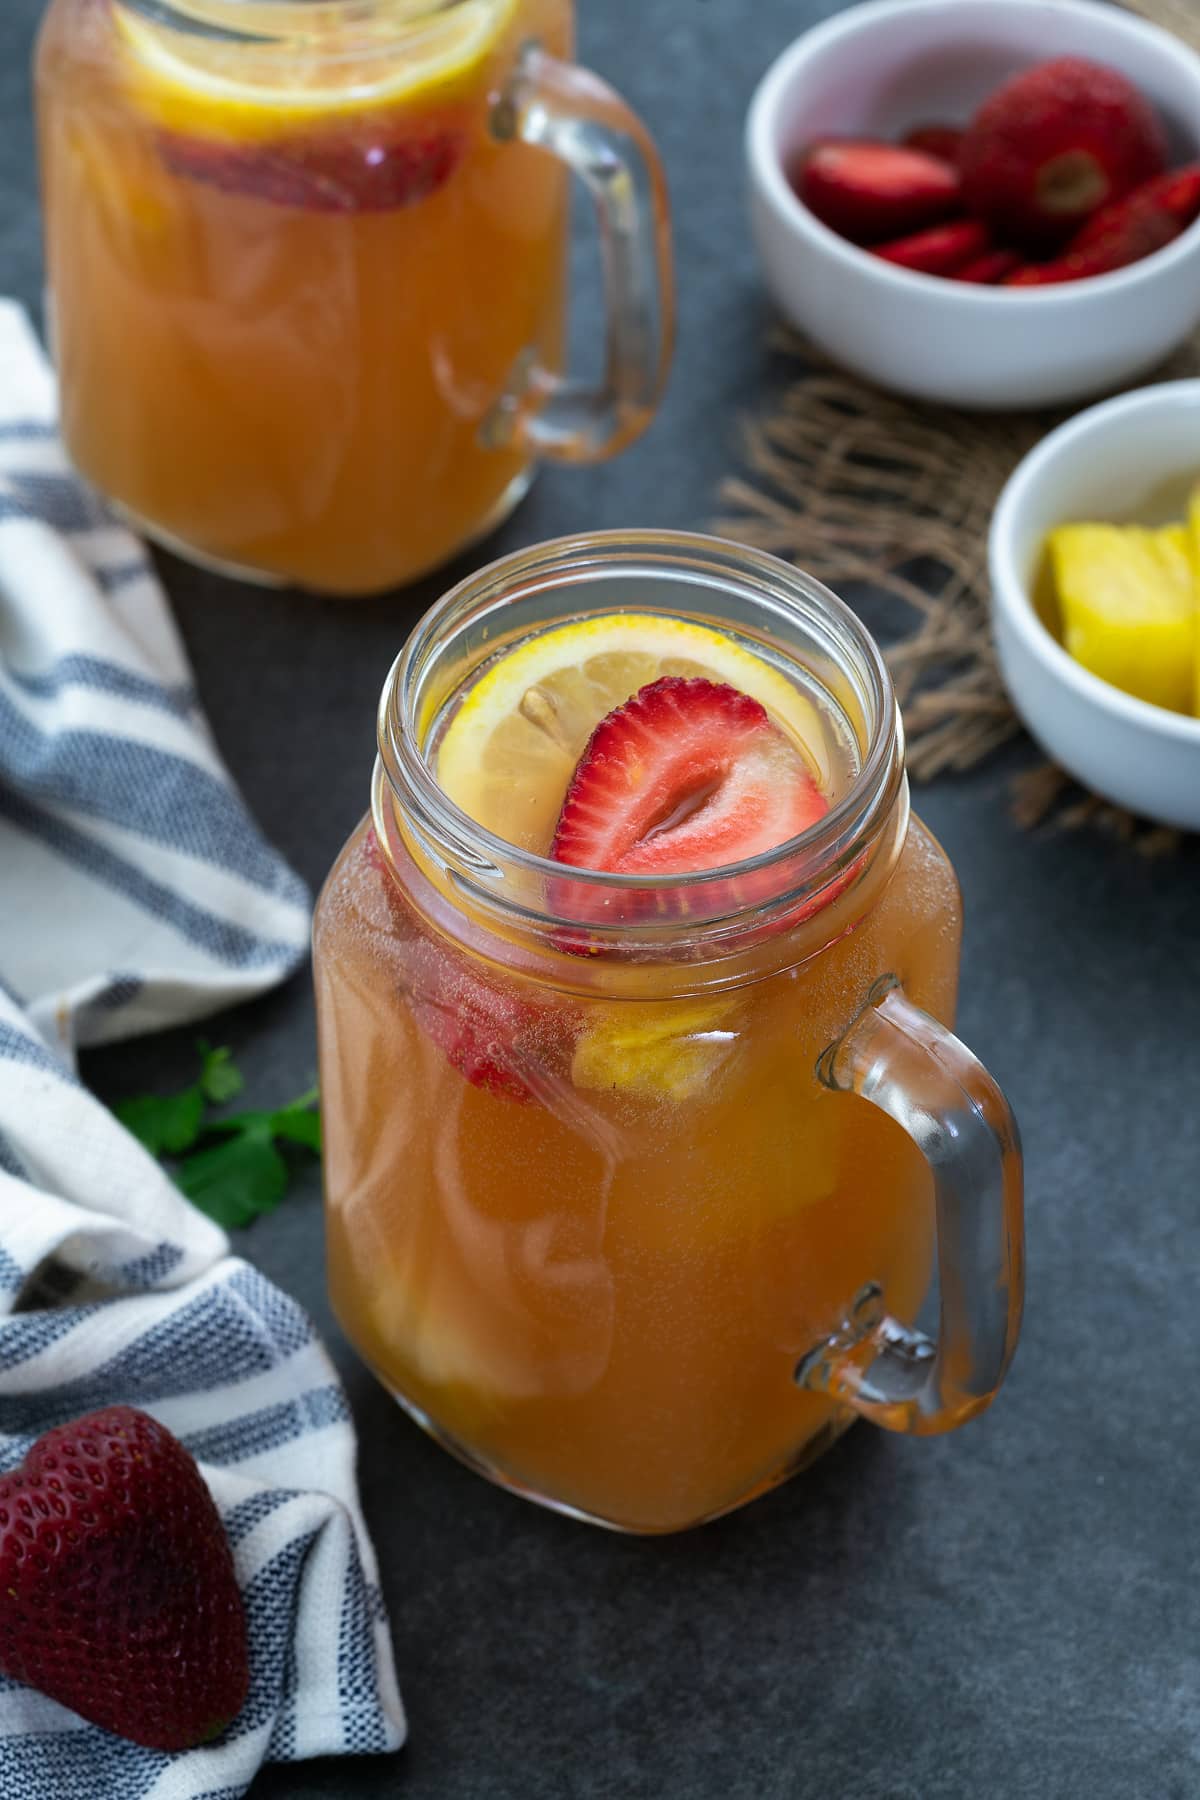 Fruit punch (party punch) served in glass mug topped with strawberries and lemon slice.